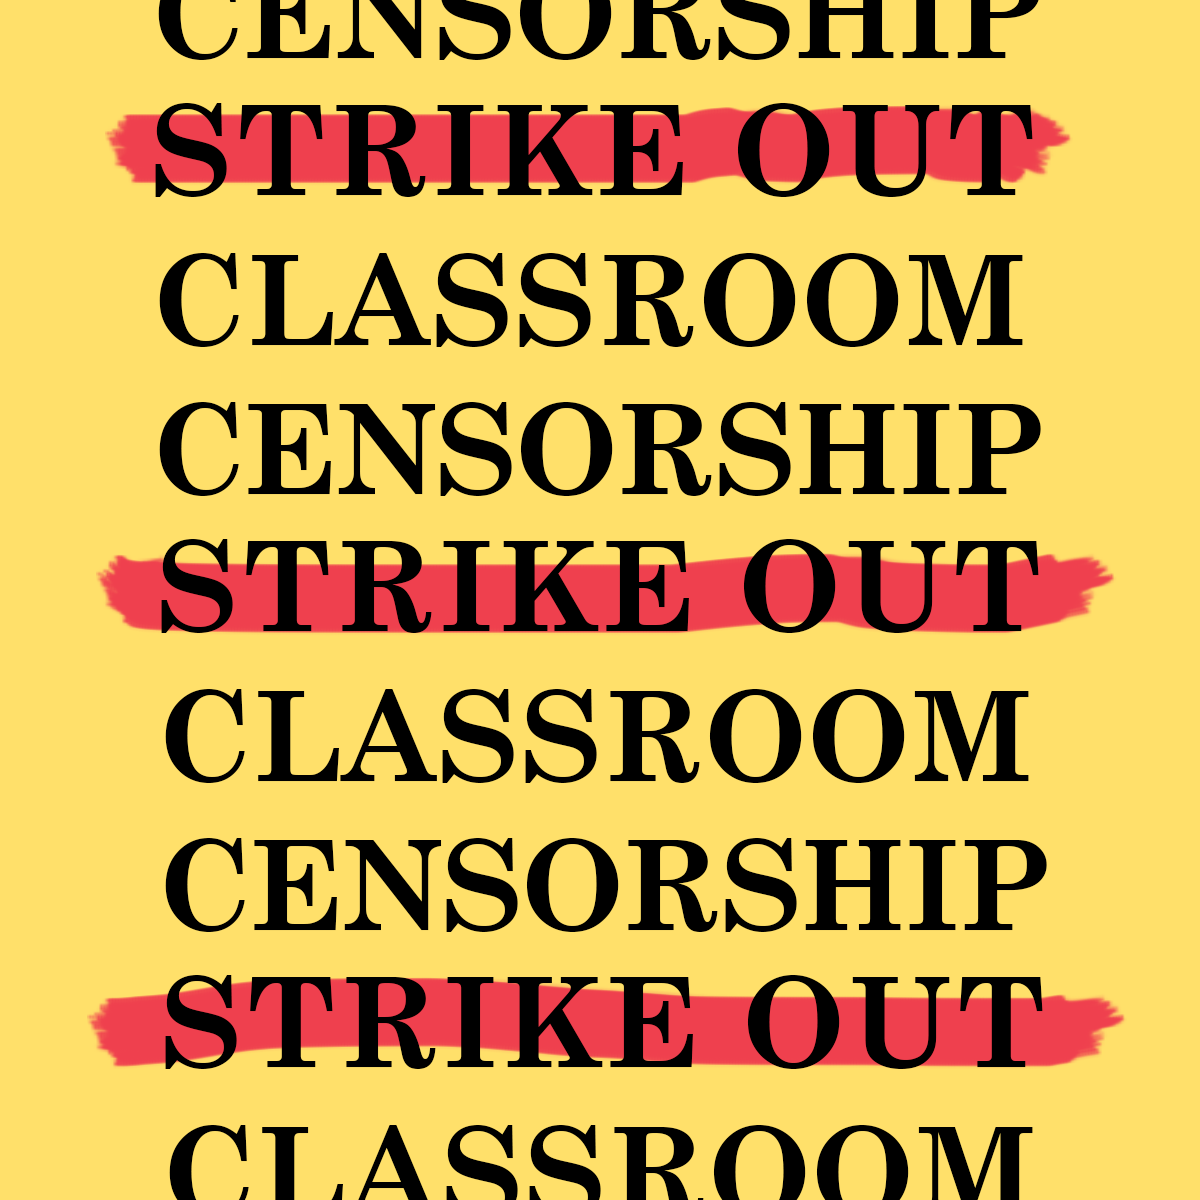 "Strike out classroom censorship" is repeated several times on a yellow background. A red marker stroke goes through the words "strike out."